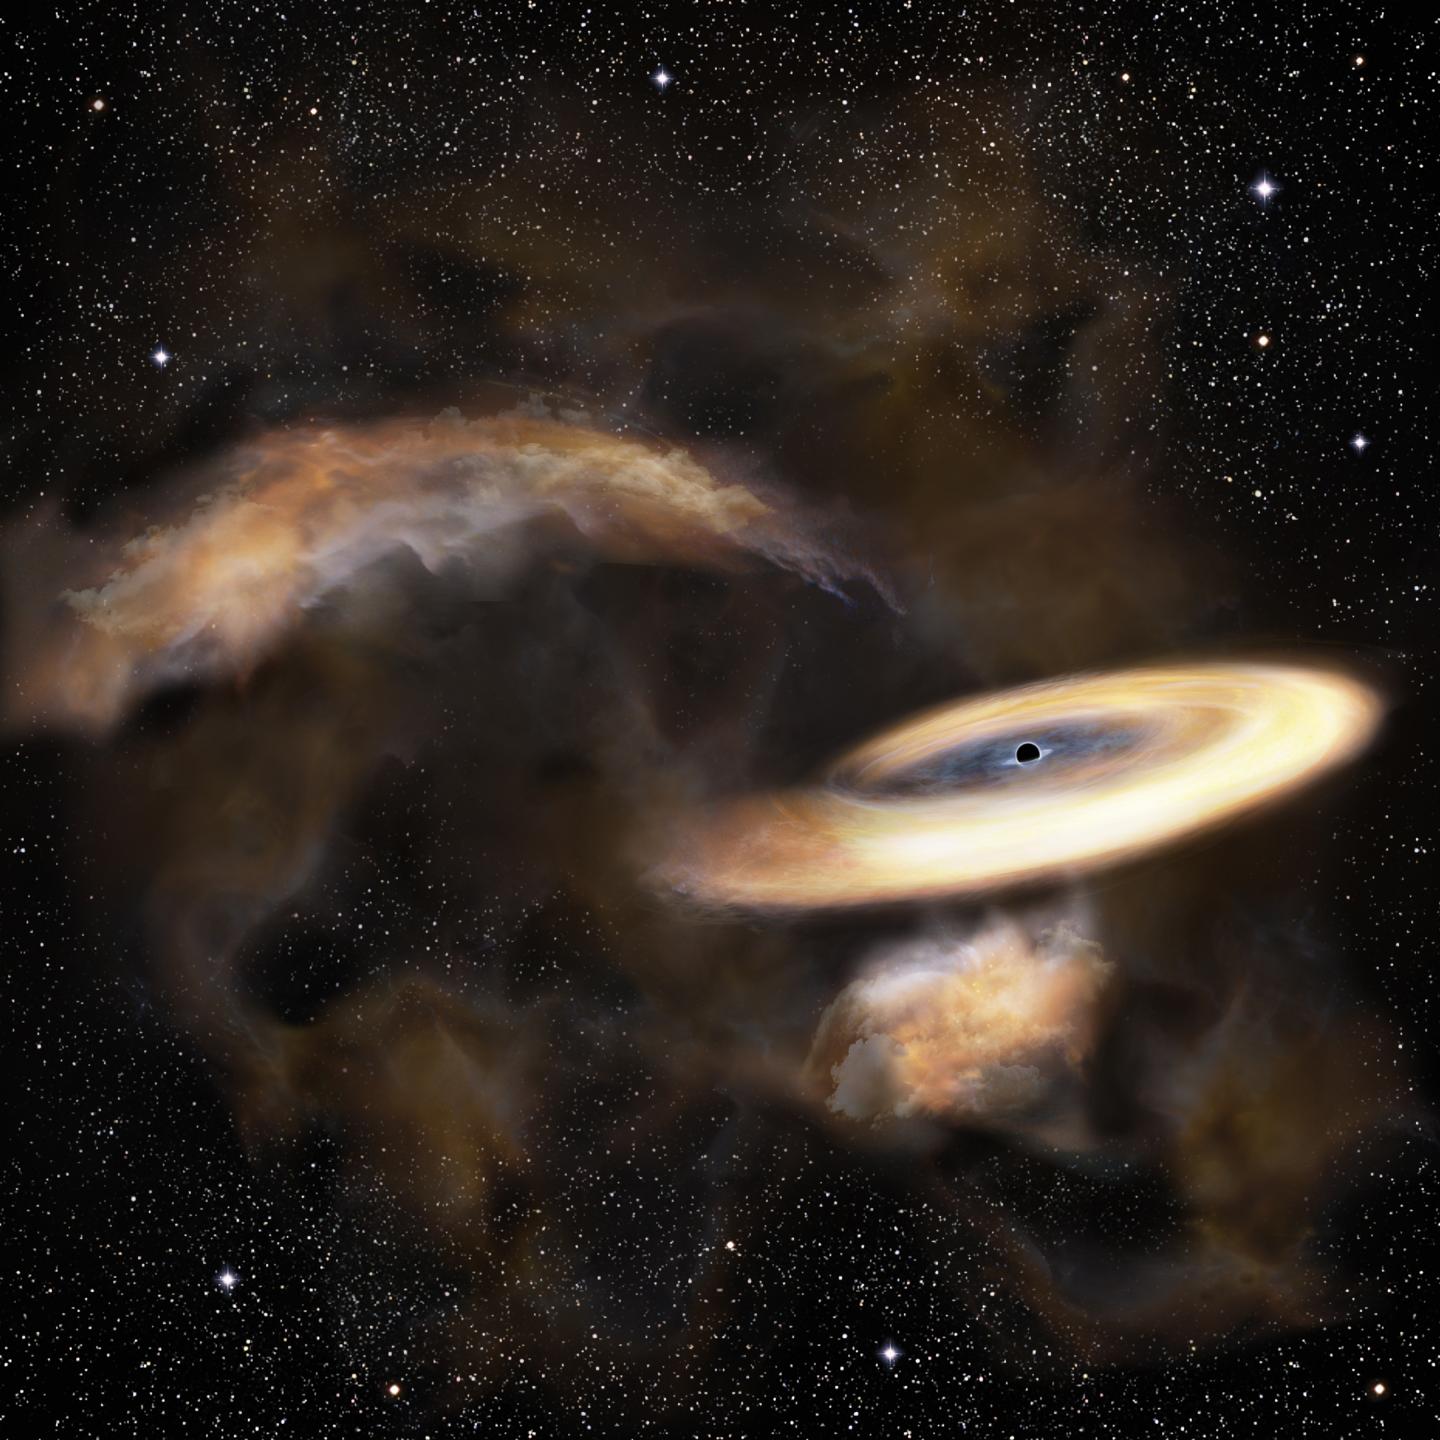 Artist's Impression of a Gas Cloud Swirling Around a Black Hole